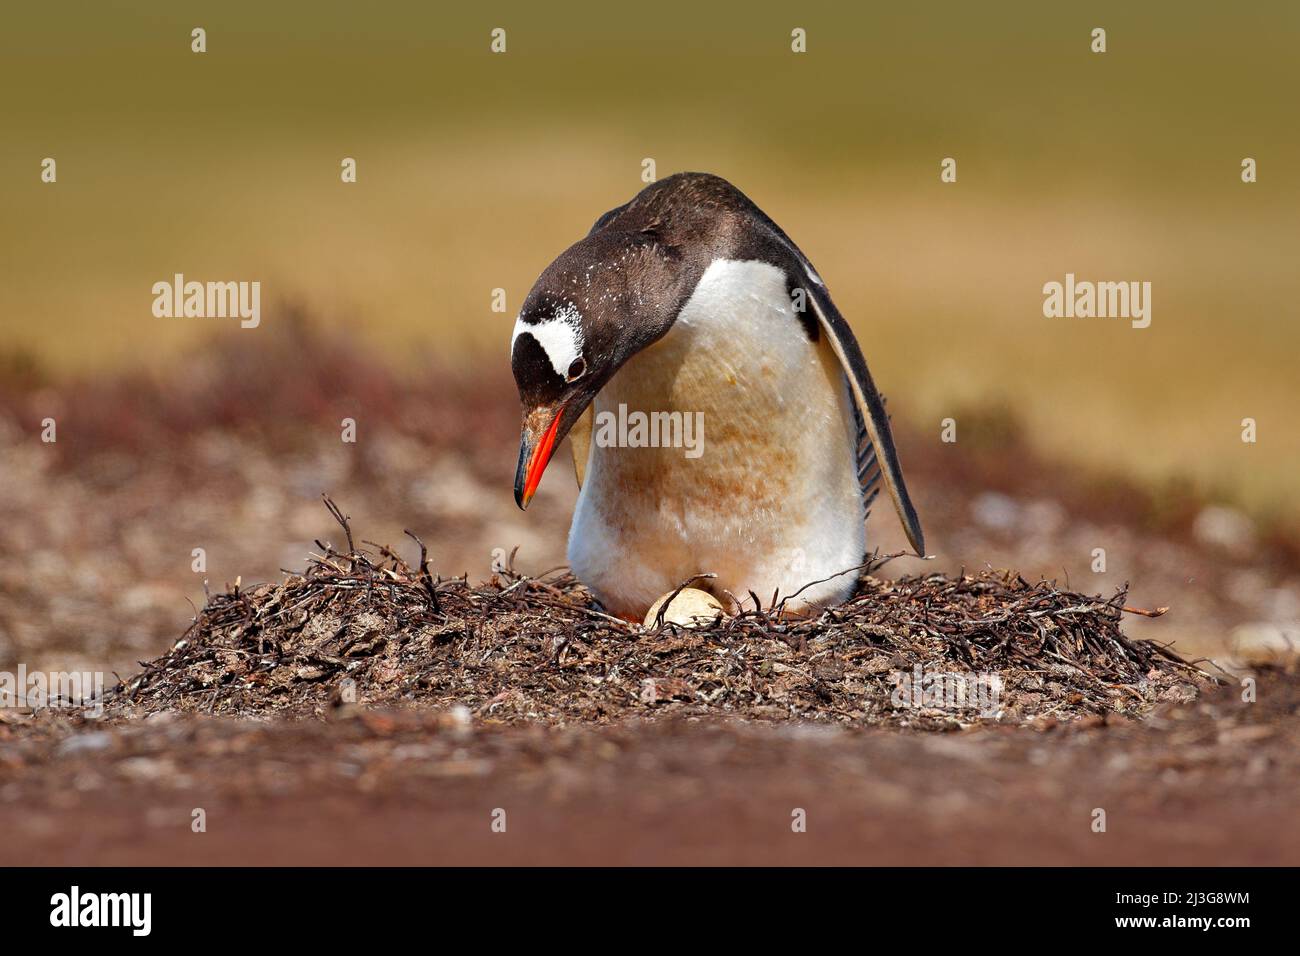 Nesting penguin on the meadow. Gentoo penguin in the nest wit two eggs, Falkland Islands. Animal behaviour, bird in the nest with egg. Wildlife scene Stock Photo